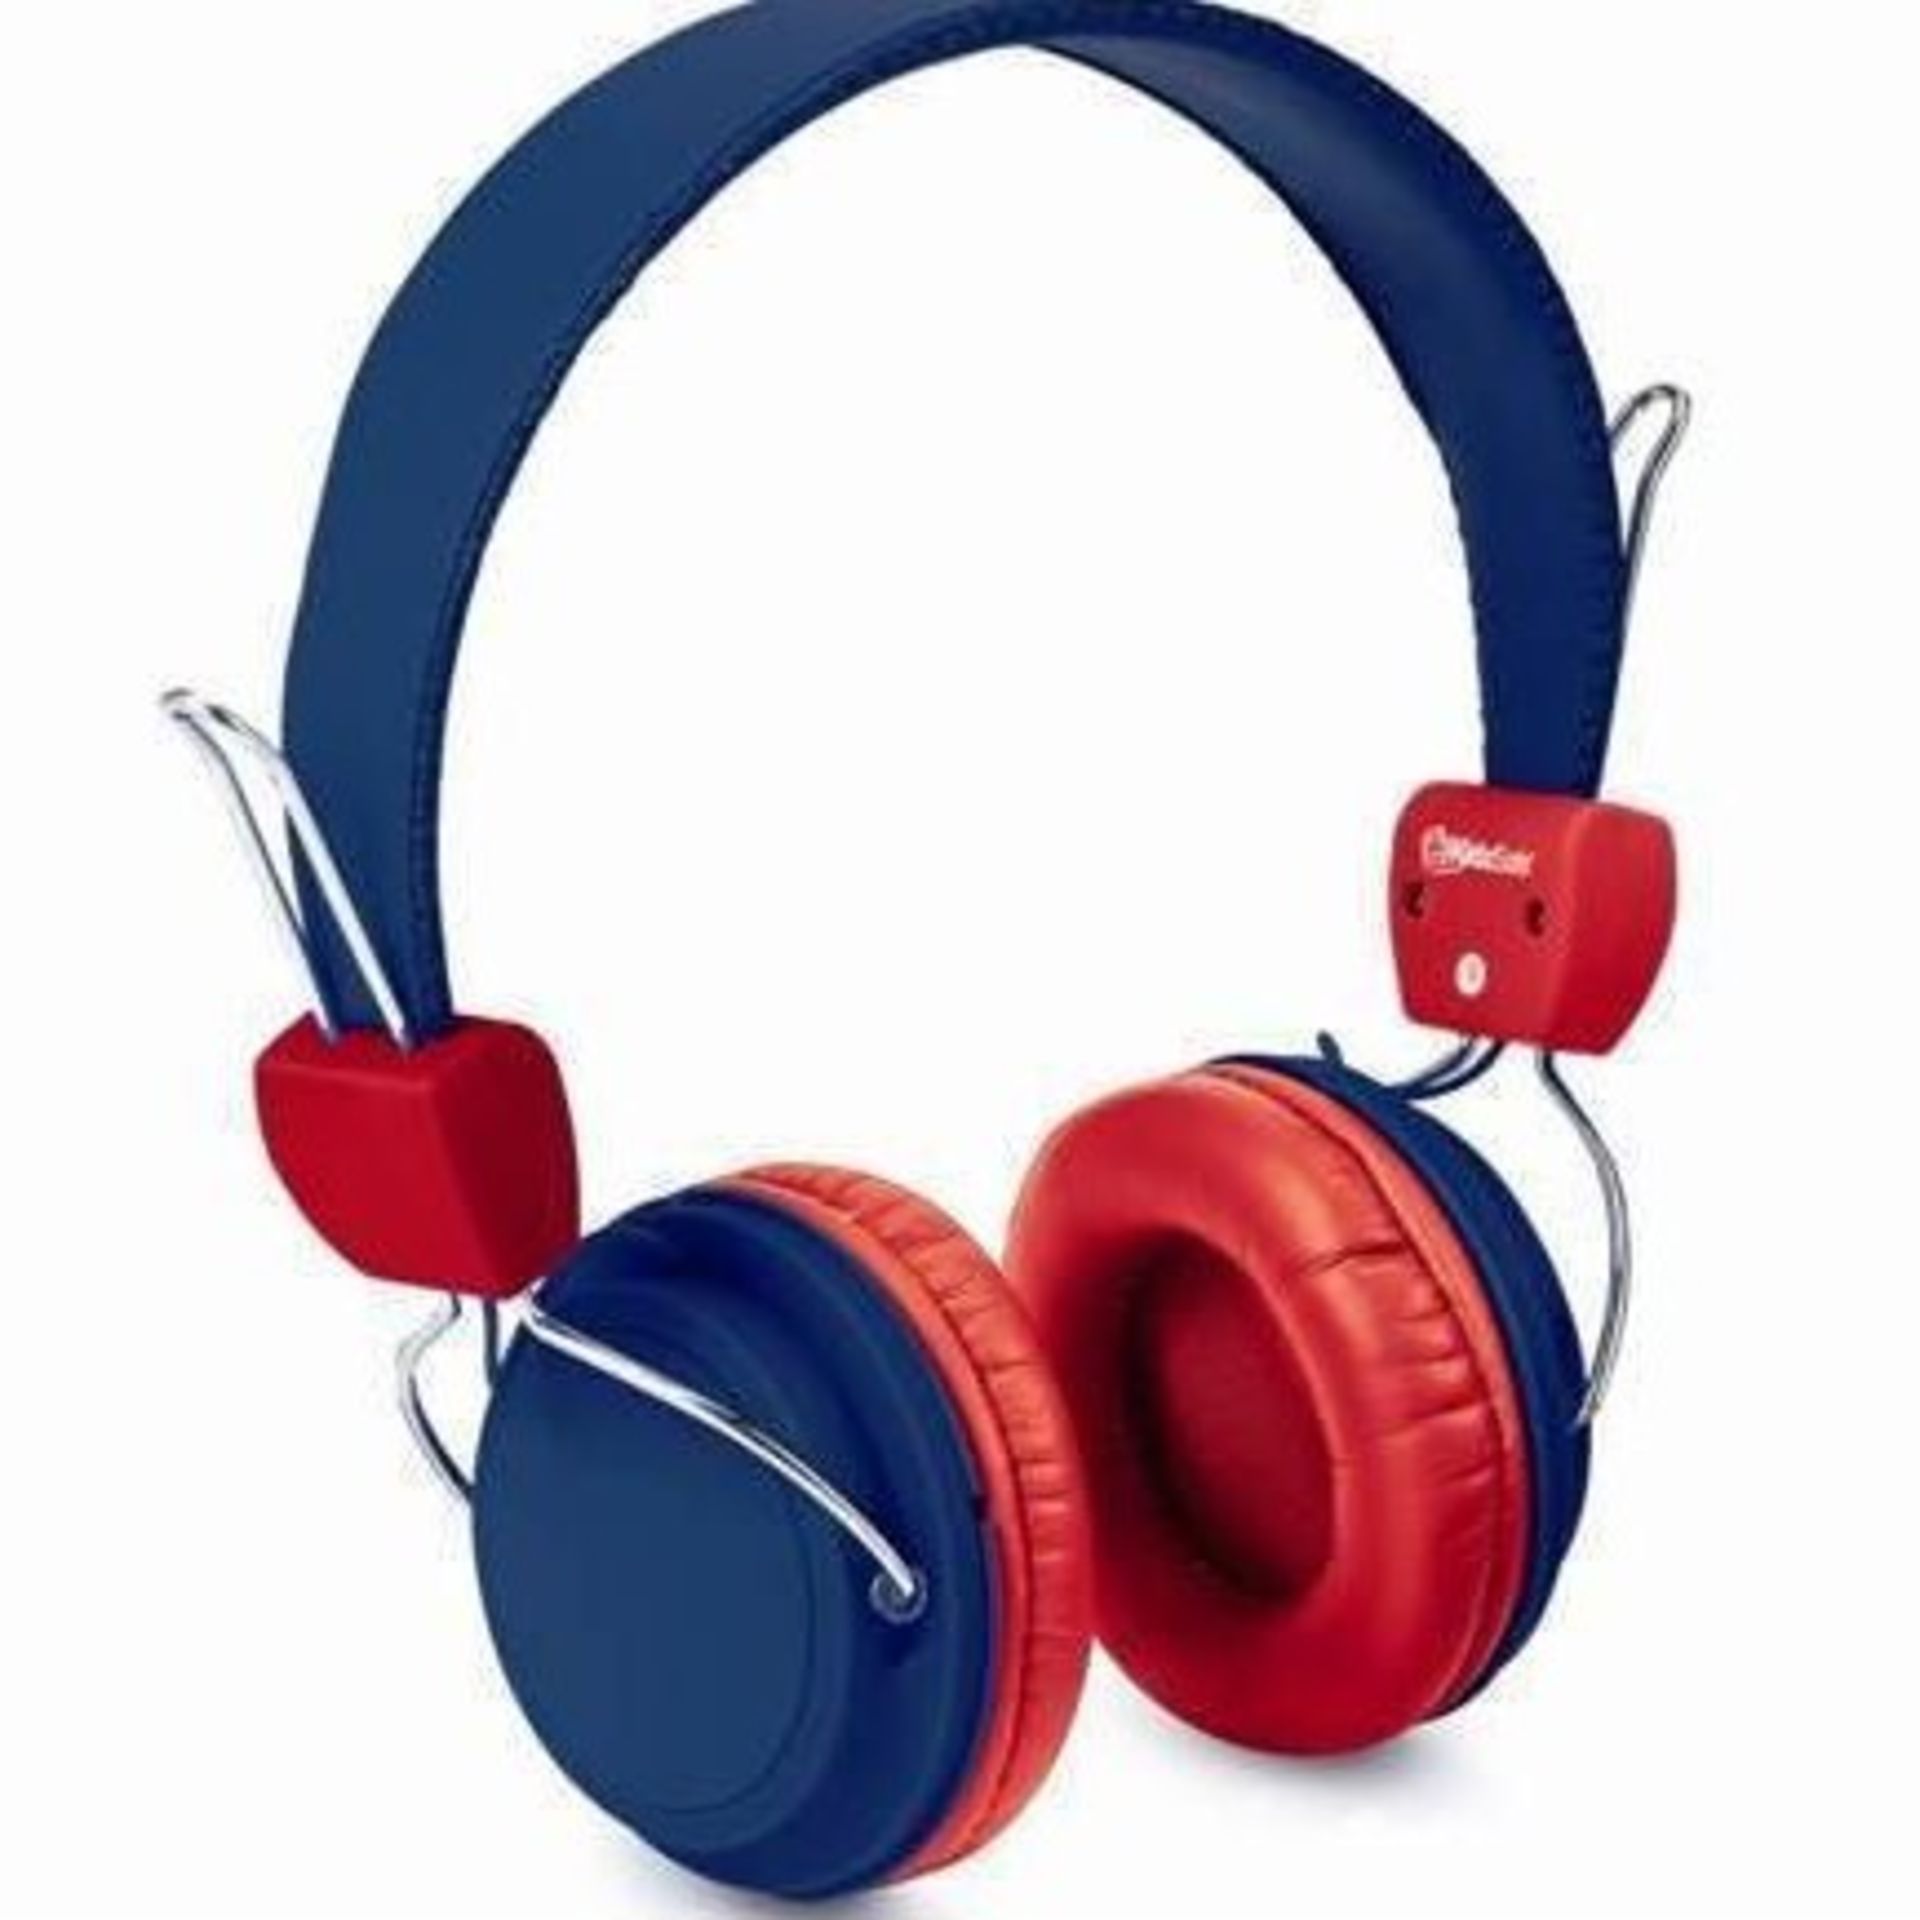 V Brand New KidzSafe Wired Headphones by SMS Audio - Amazon £29.81 - Ebay £24.99 - with Over 50